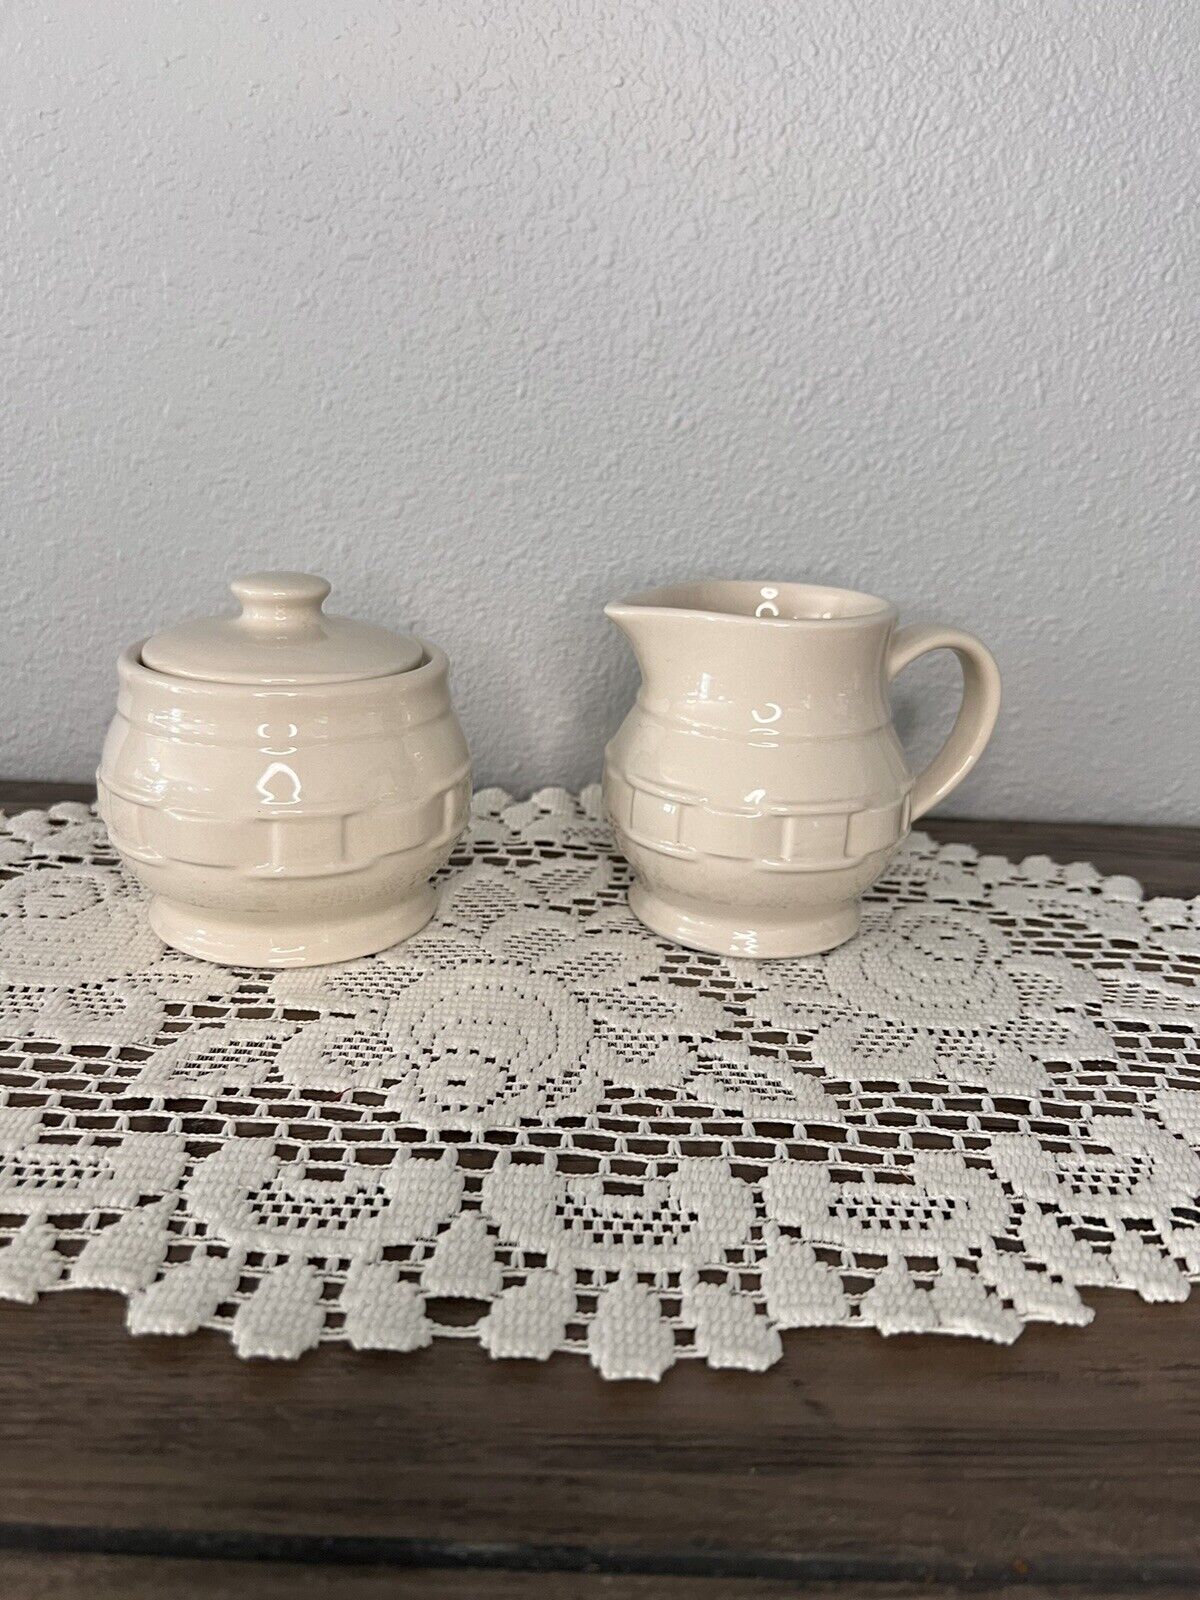 Longaberger Woven Traditions Pottery IVORY Sugar & Creamer Set Made In The USA 